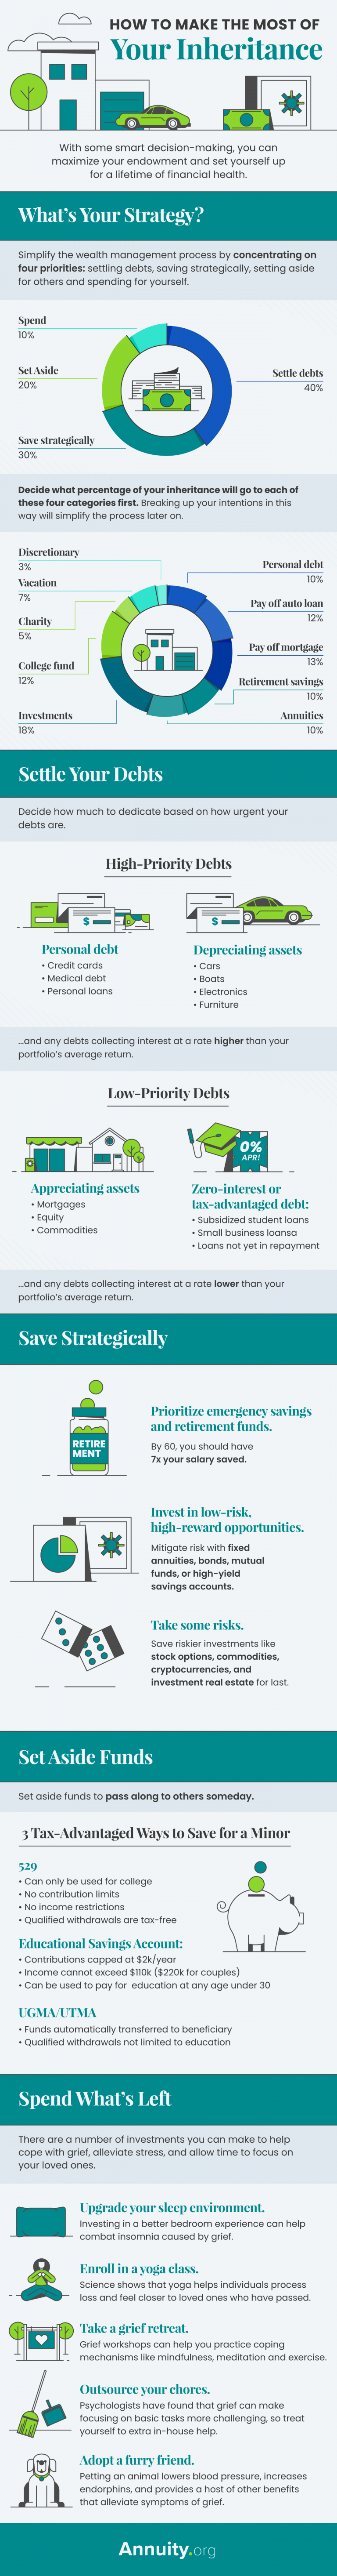 Infographic - How to Make the Most of Your Inheritance